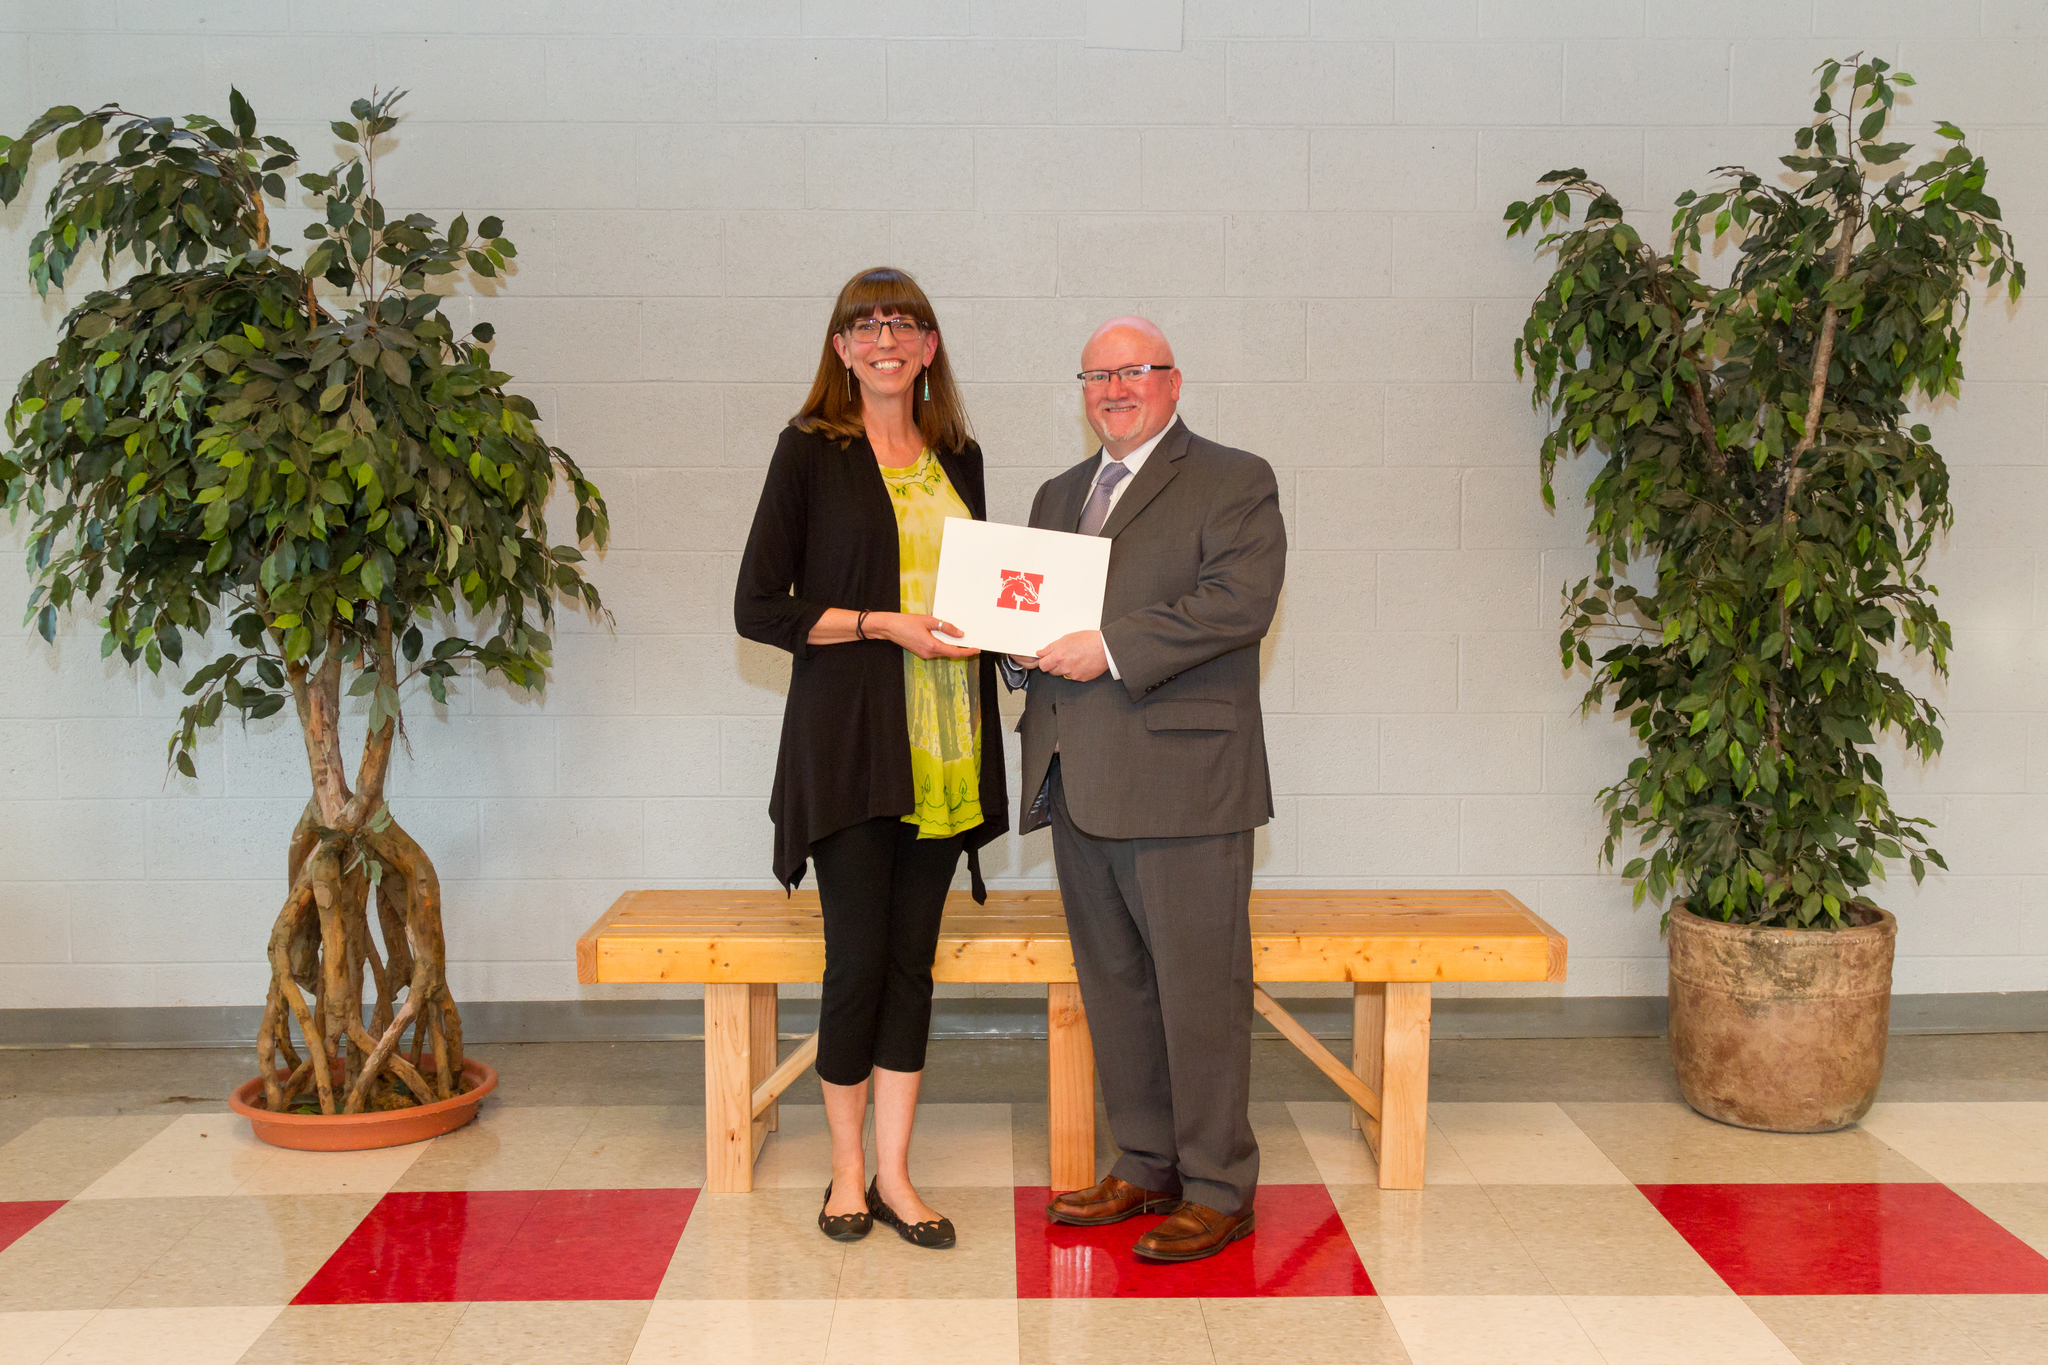 Mrs. Courtney and the Board President holding award